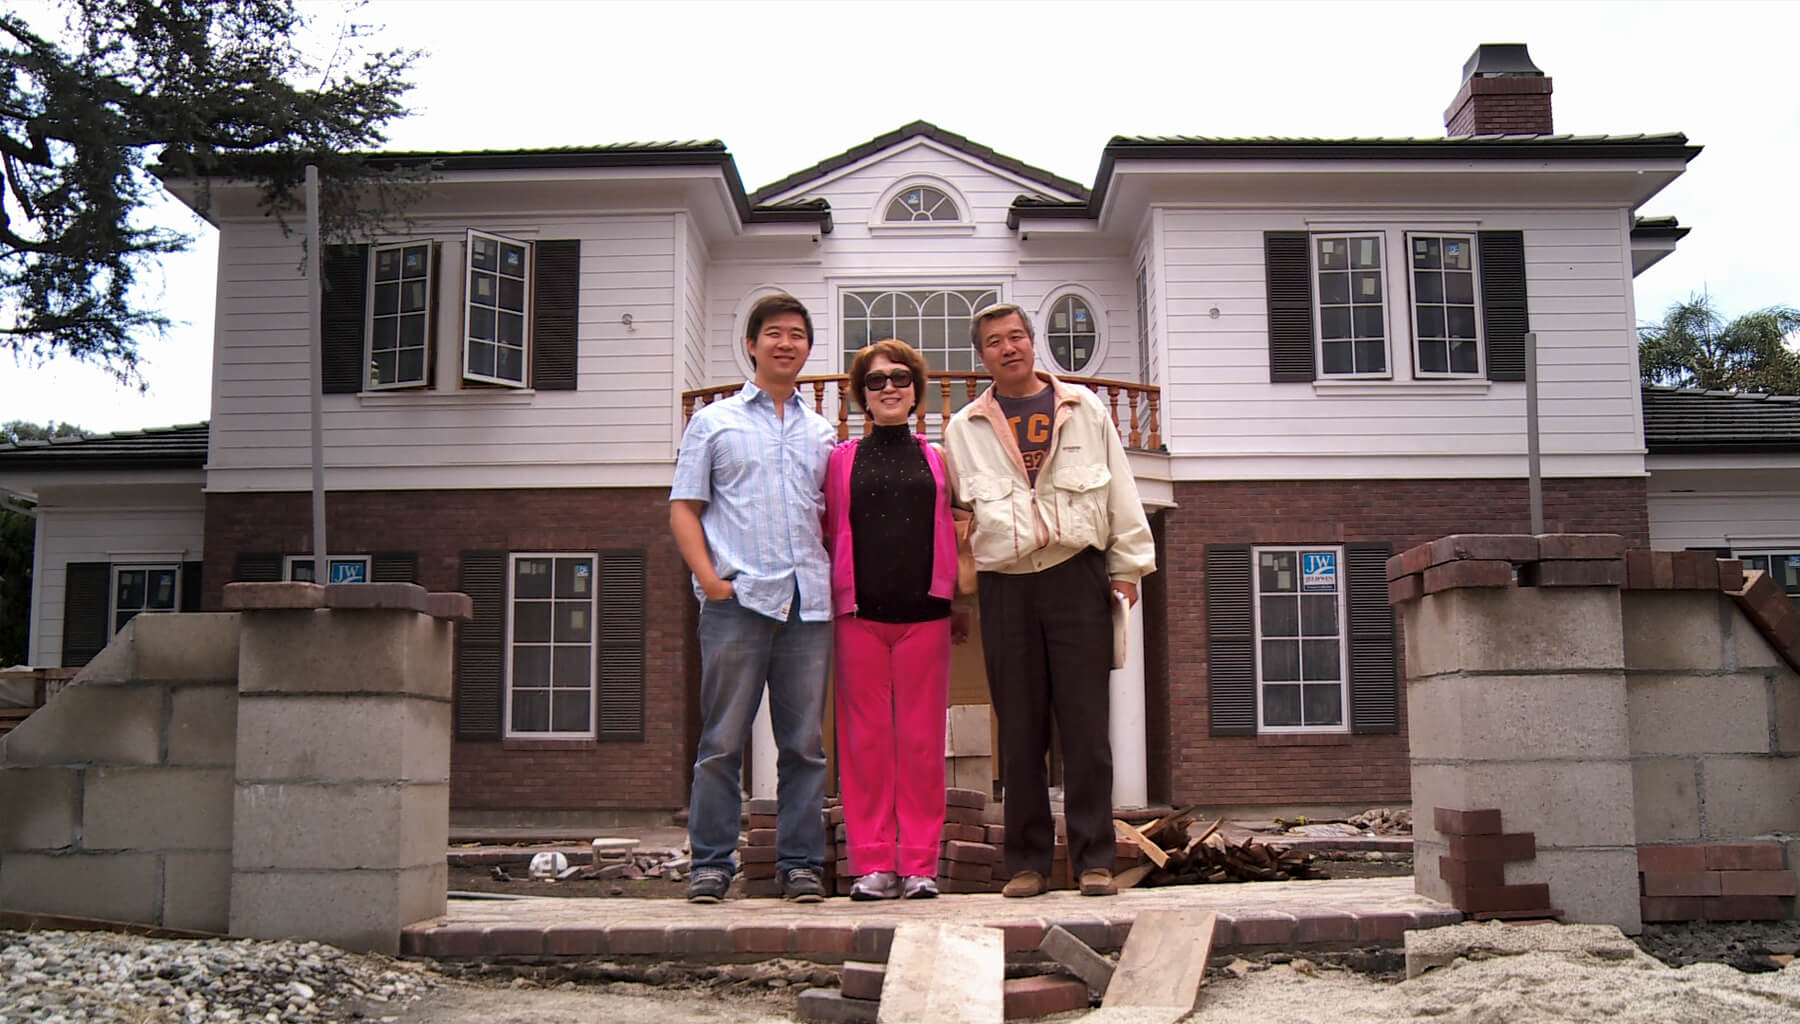 Still from Xmas Without China. From left to right, a young man wears a blue and white blouse with jeans, a woman wears a pink jumpsuit with a black top, and an older man wears black pants and a white jacket. They stand in front of a white and brick house with construction materials surrounding them.